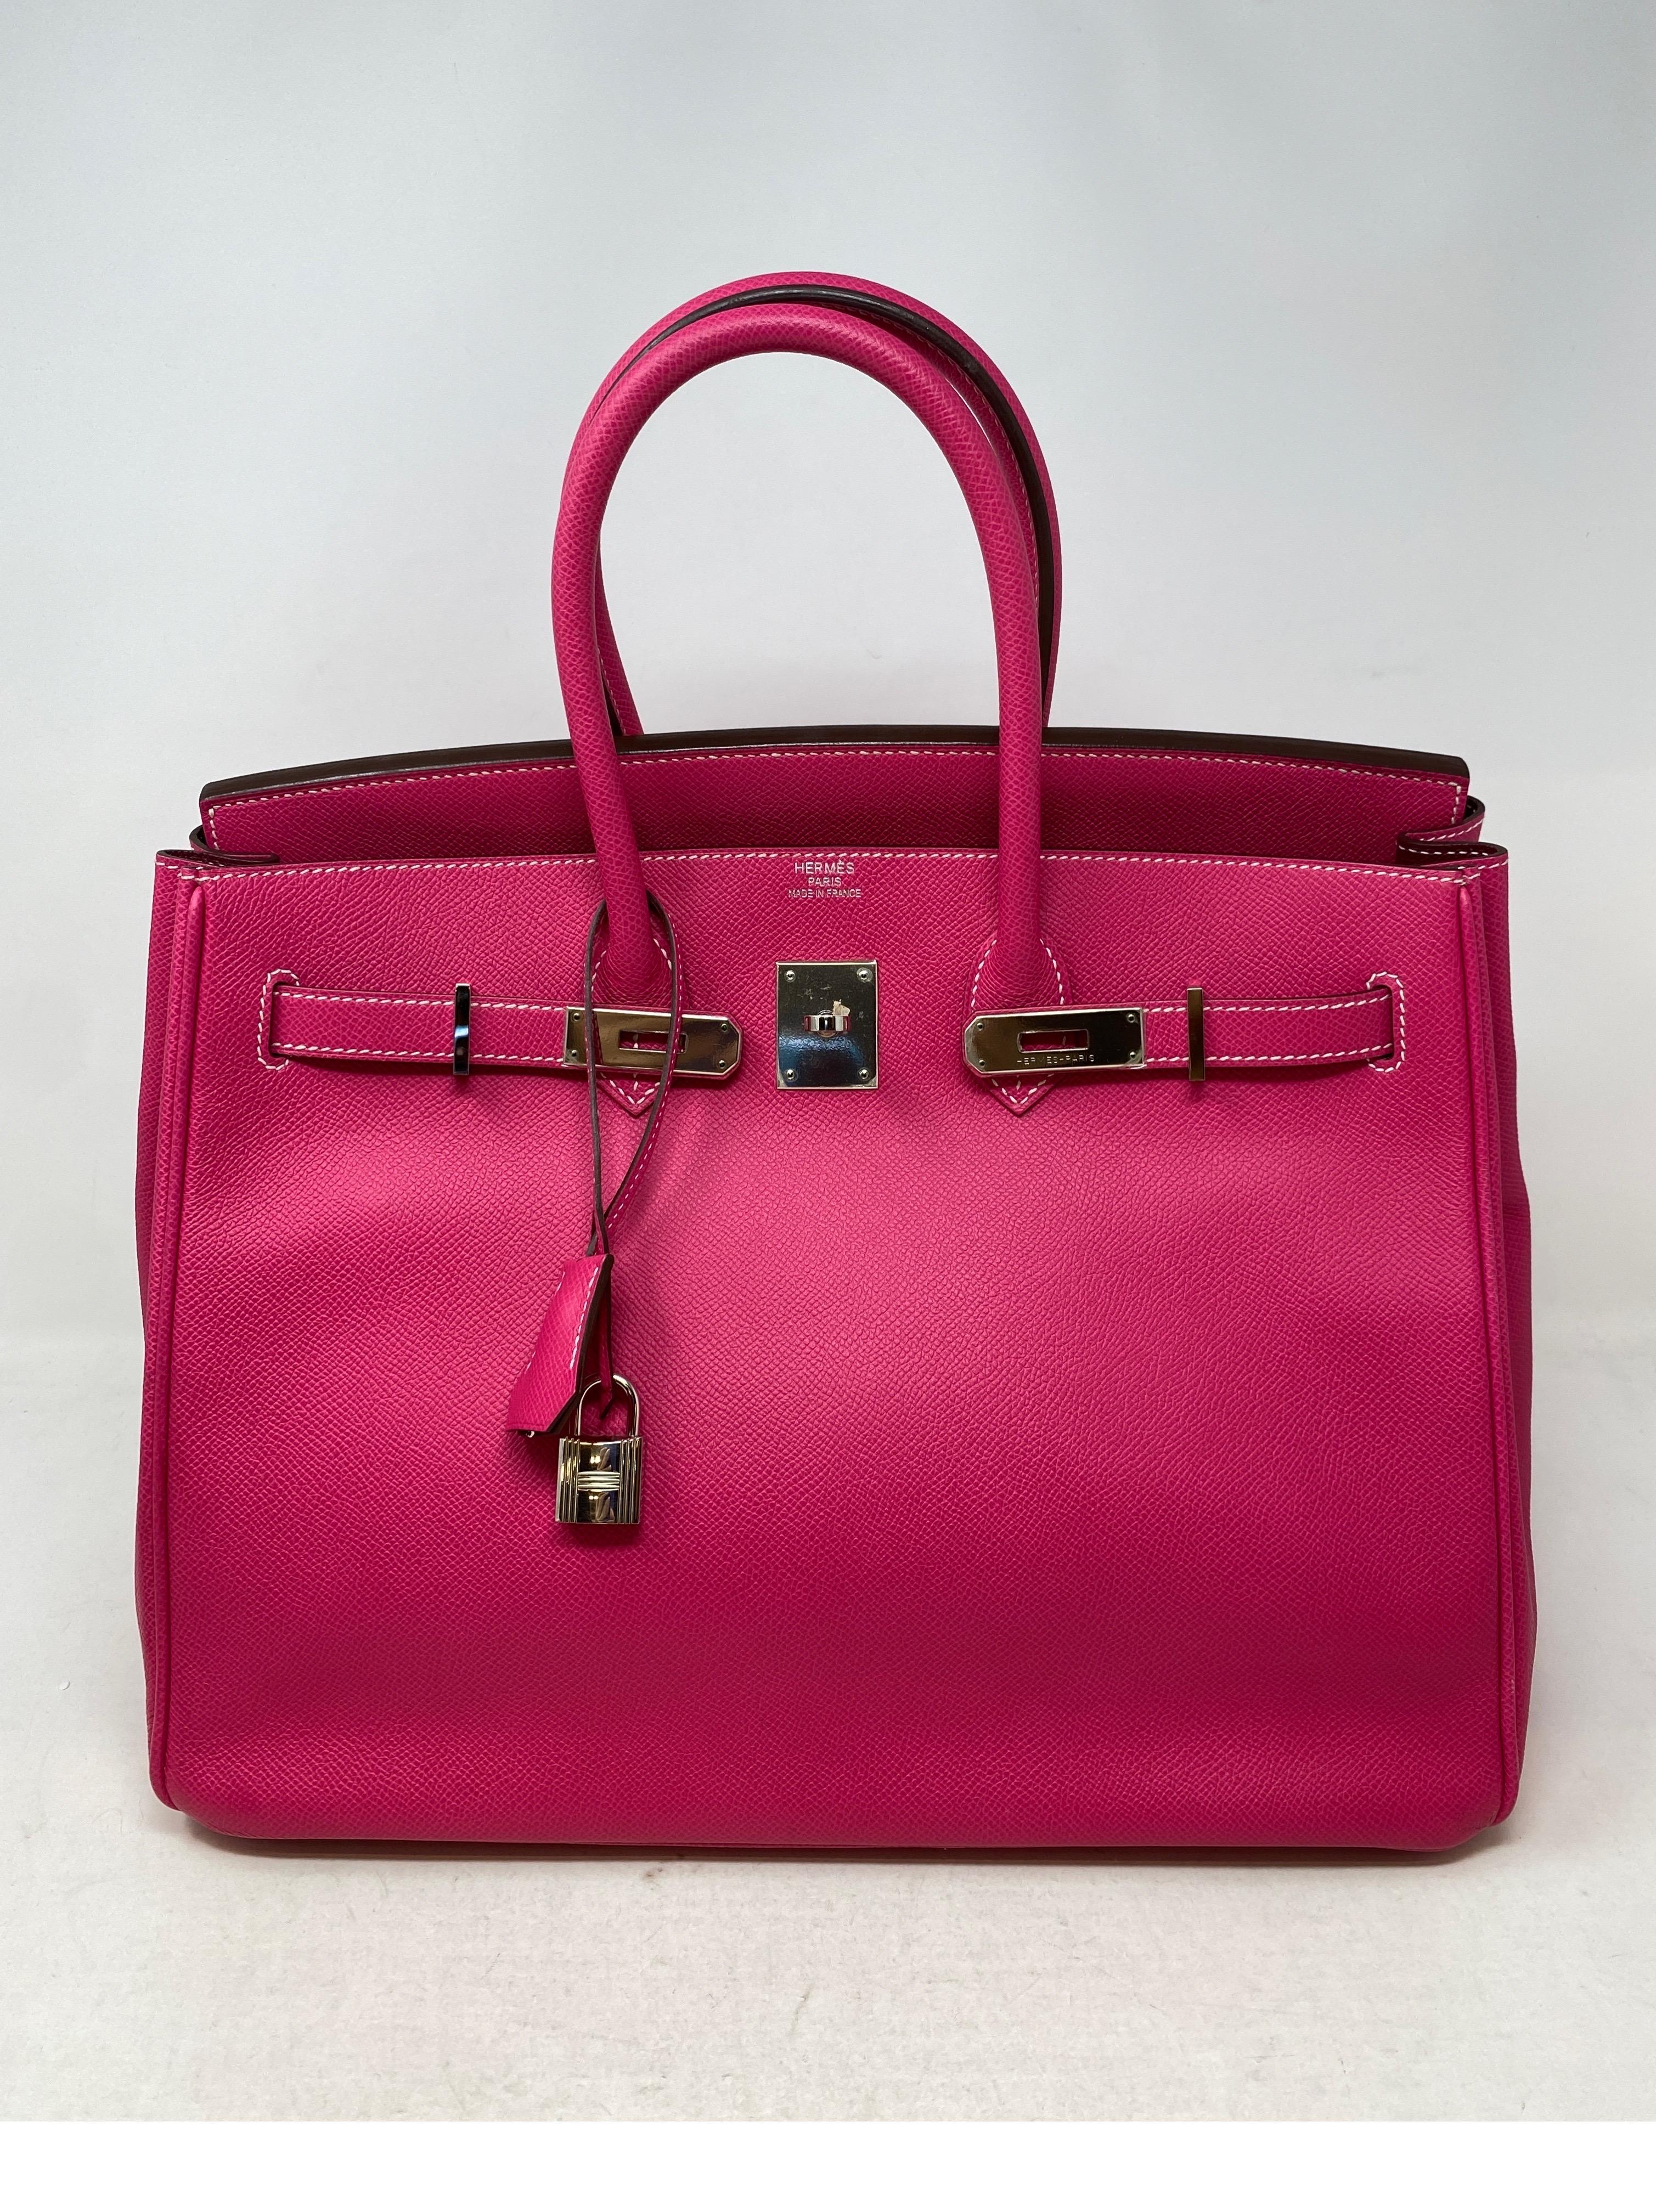 Hermes Rose Tyrien Birkin 35. Candy bi-color with rouge red interior. Beautiful dark hot pink color with palladium hardware. Good condition. Includes clochette, lock, keys, and dust cover. Guaranteed authentic. 